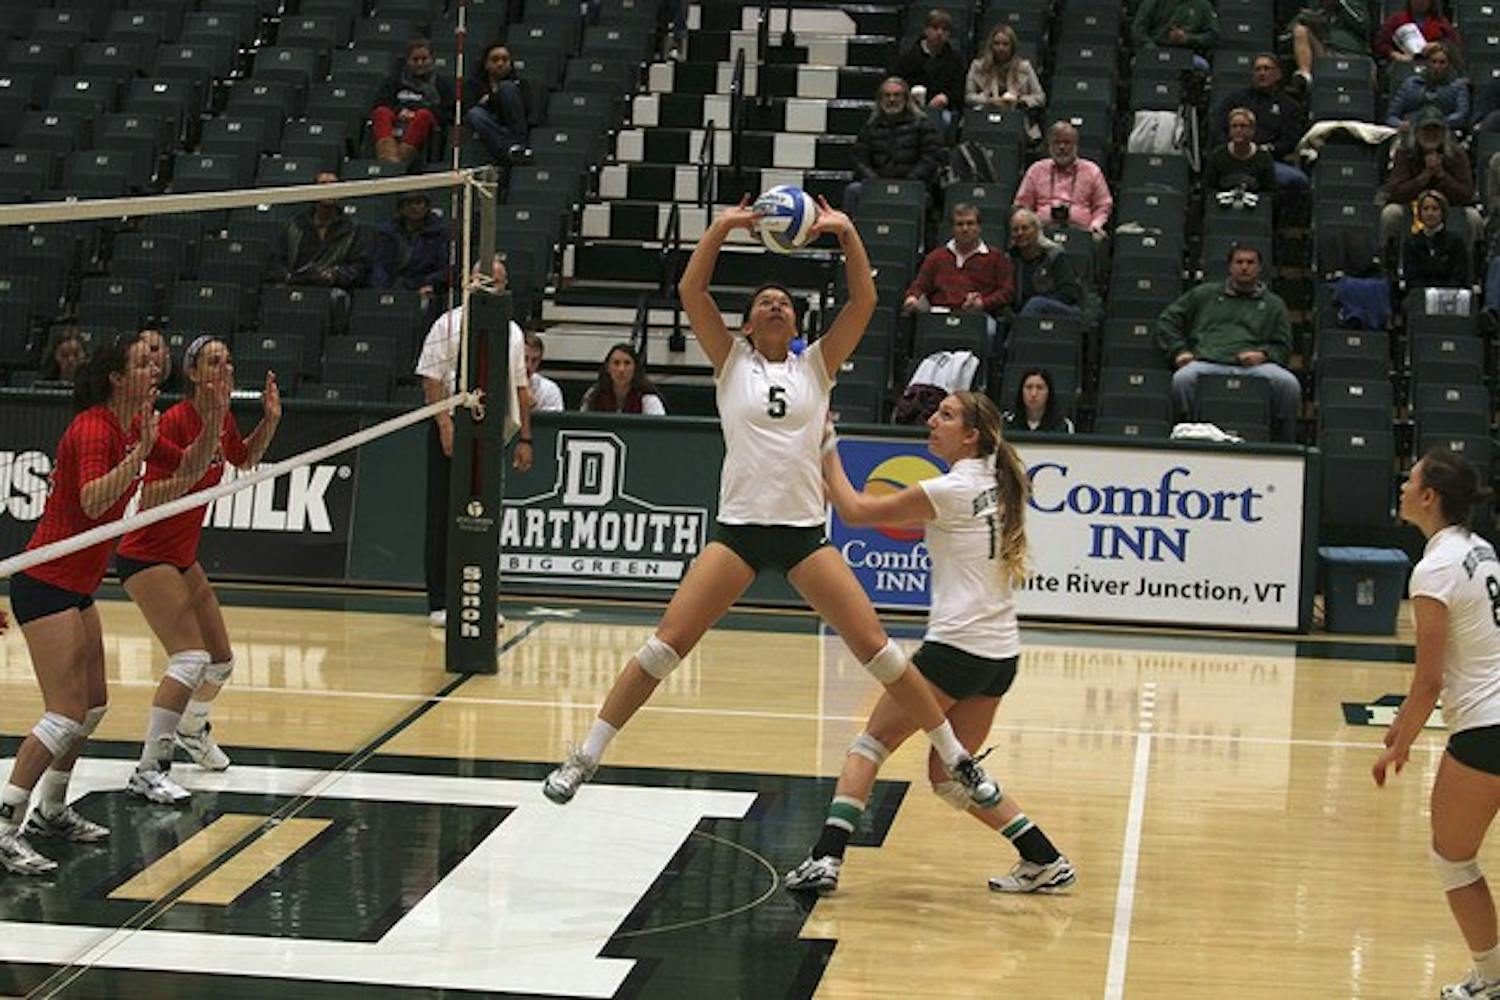 The Dartmouth volleyball team came back from a two-set-to-one deficit to defeat Harvard University in five games on Friday.